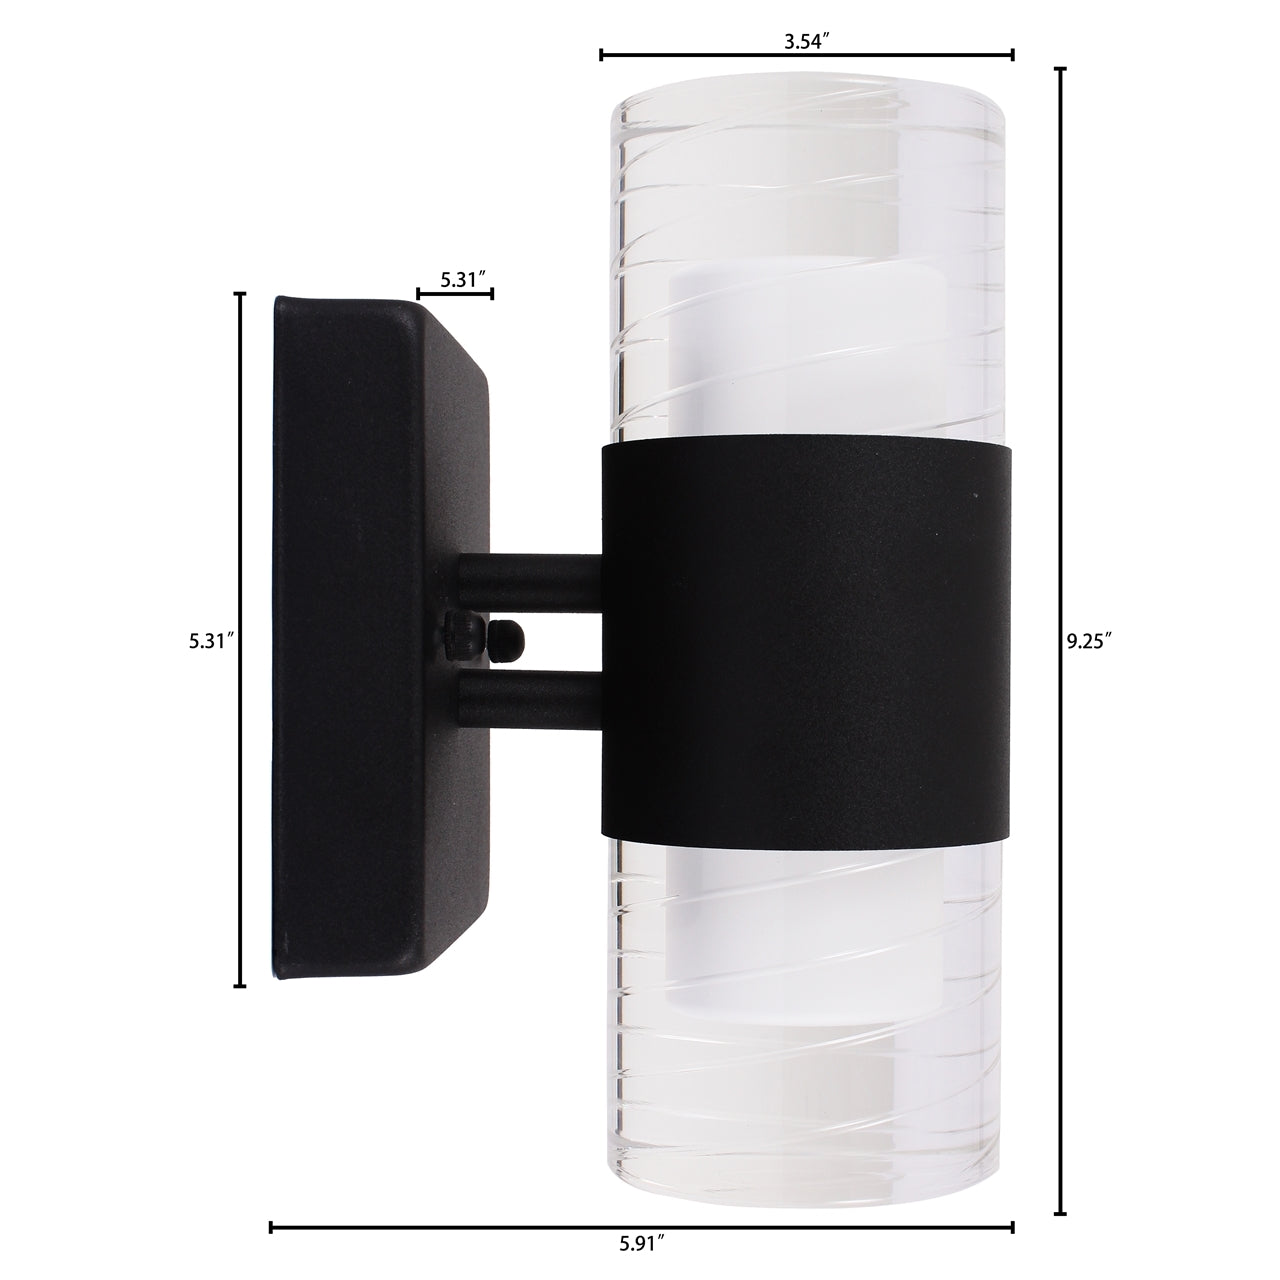 AALOK 2 Light- LED Indoor/Outdoor Wall Sconce 3000K Warm White 10" Tall